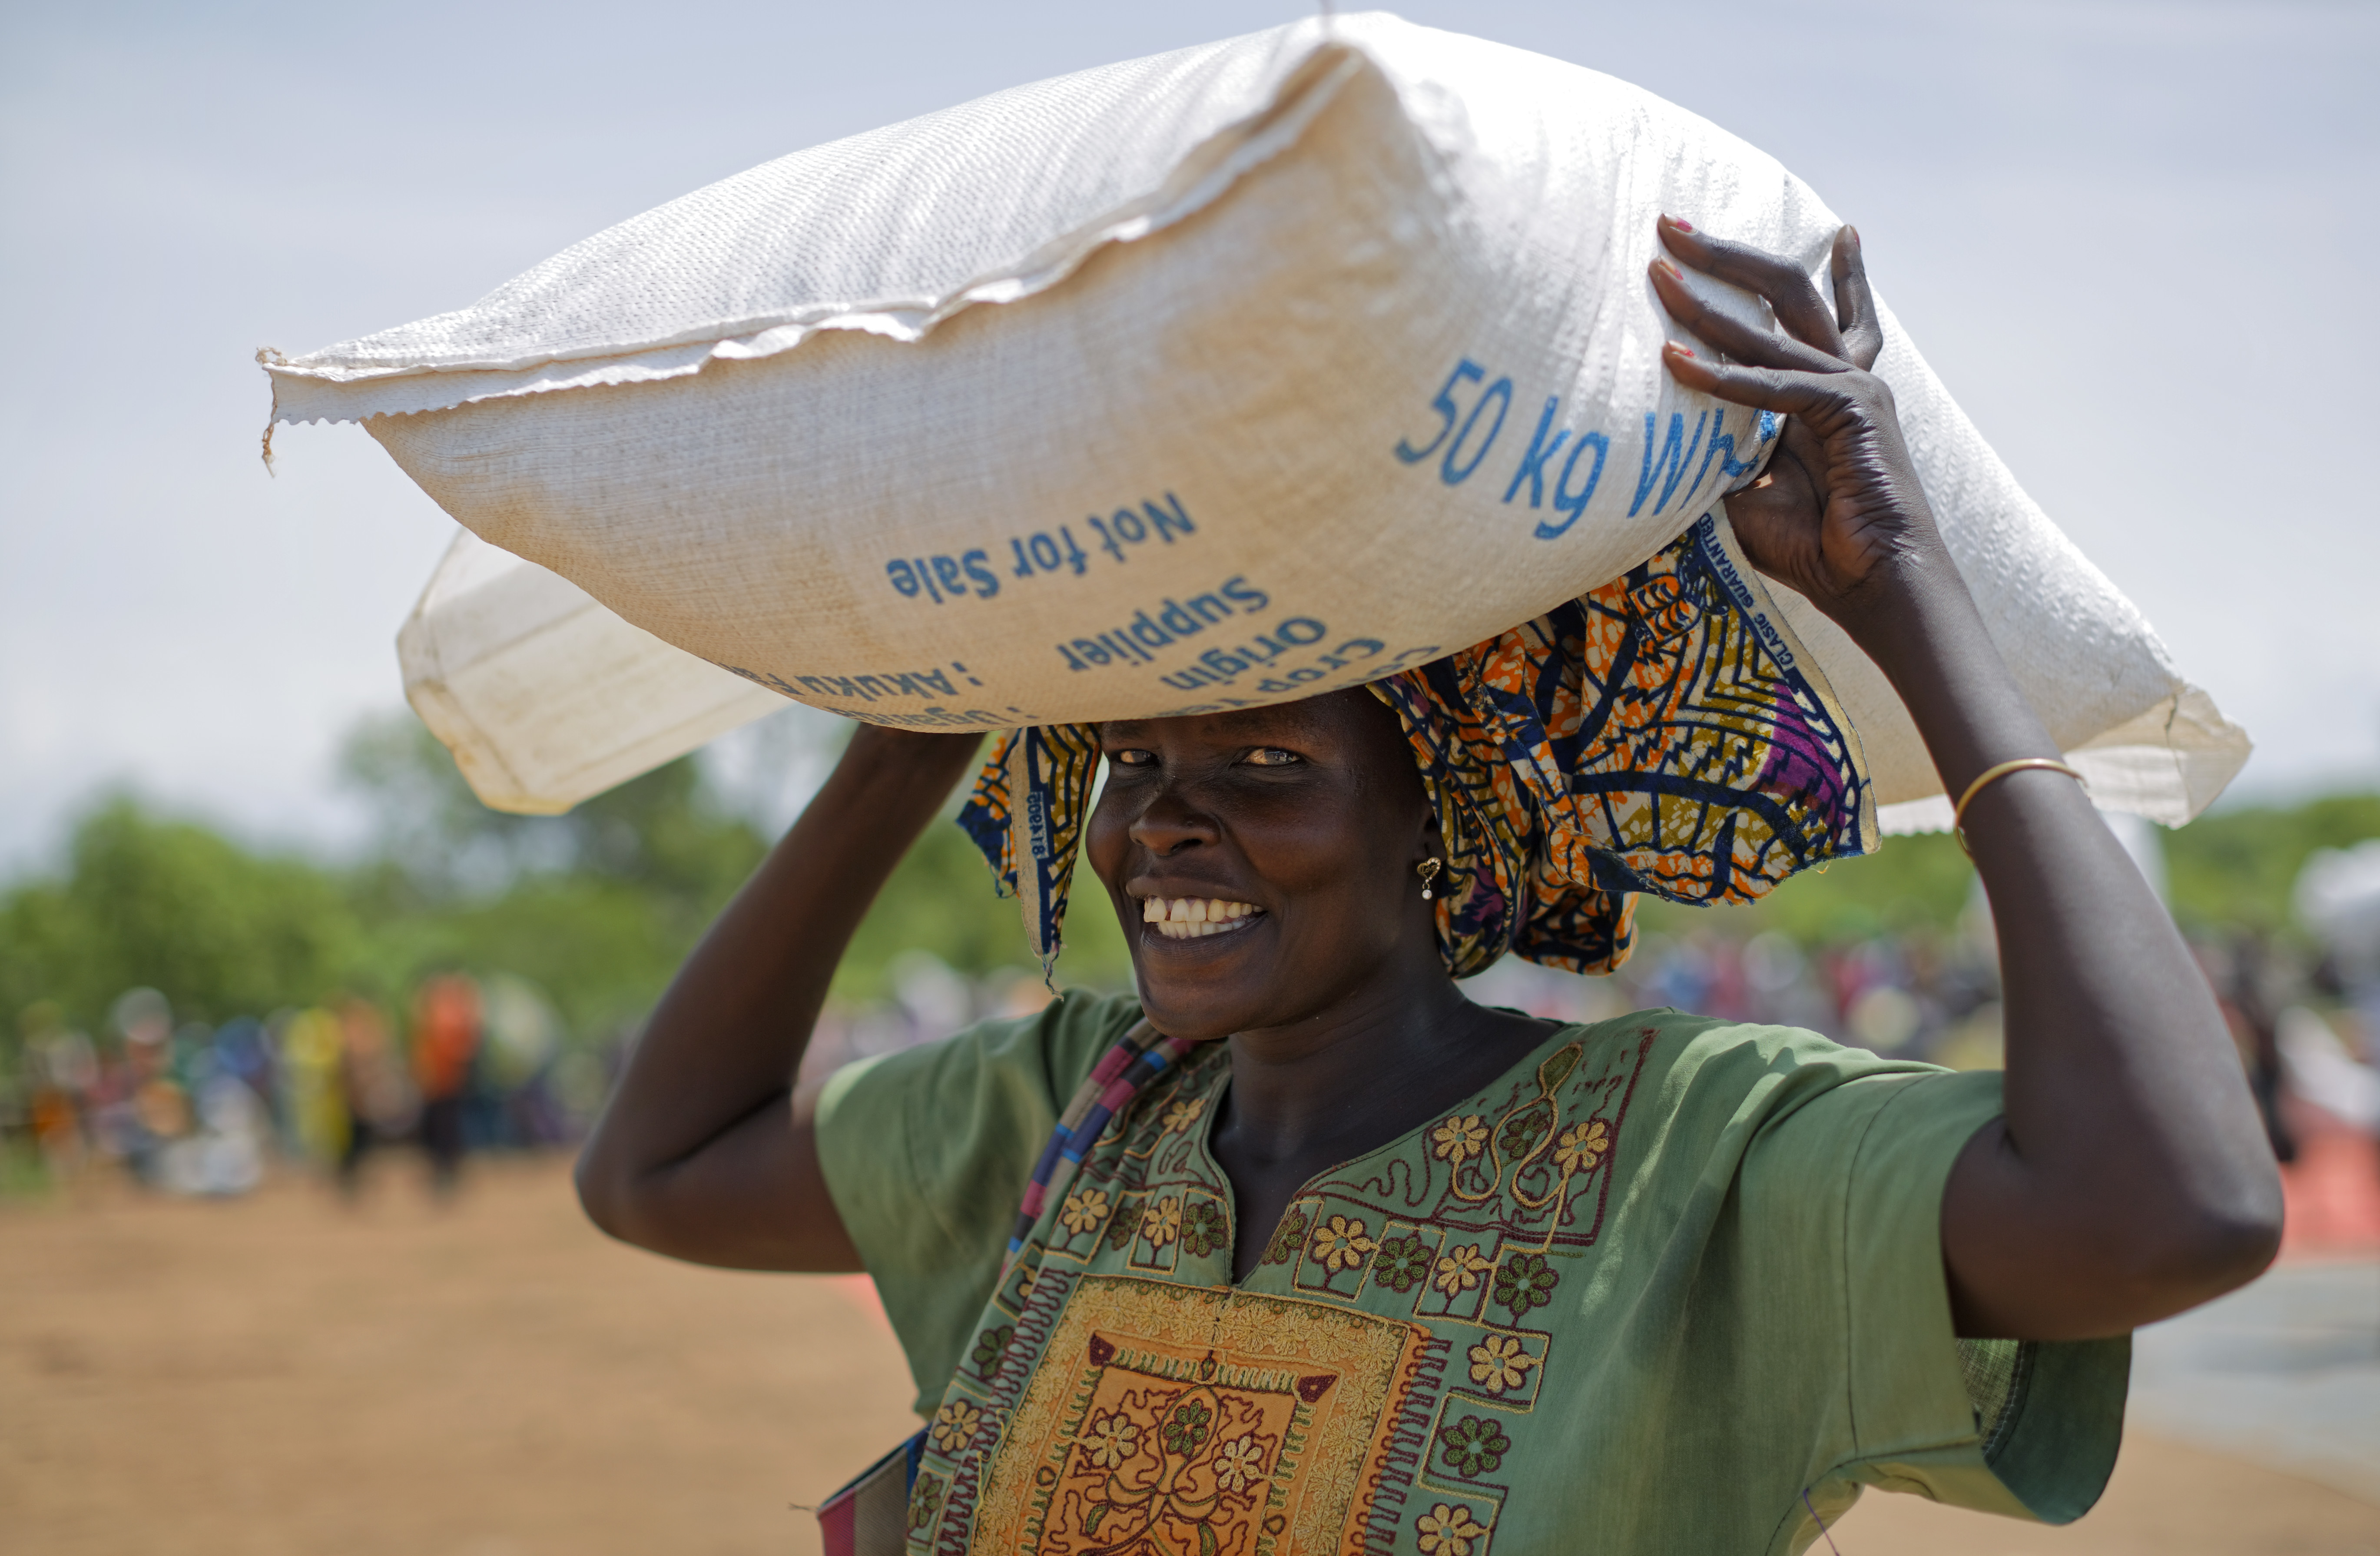 A South Sudanese refugee woman smiles as she carries away a heavy sack of maize after receiving a food distribution in Bidi Bidi, Uganda Wednesday, June 7, 2017. Bidi Bidi is a sprawling complex of mud-brick houses that is now the world's largest refugee settlement holding some of those who fled the civil war in South Sudan, which has killed tens of thousands and driven out more than 1.5 million people in the past three years, creating the world's largest refugee crisis. (AP Photo/Ben Curtis)